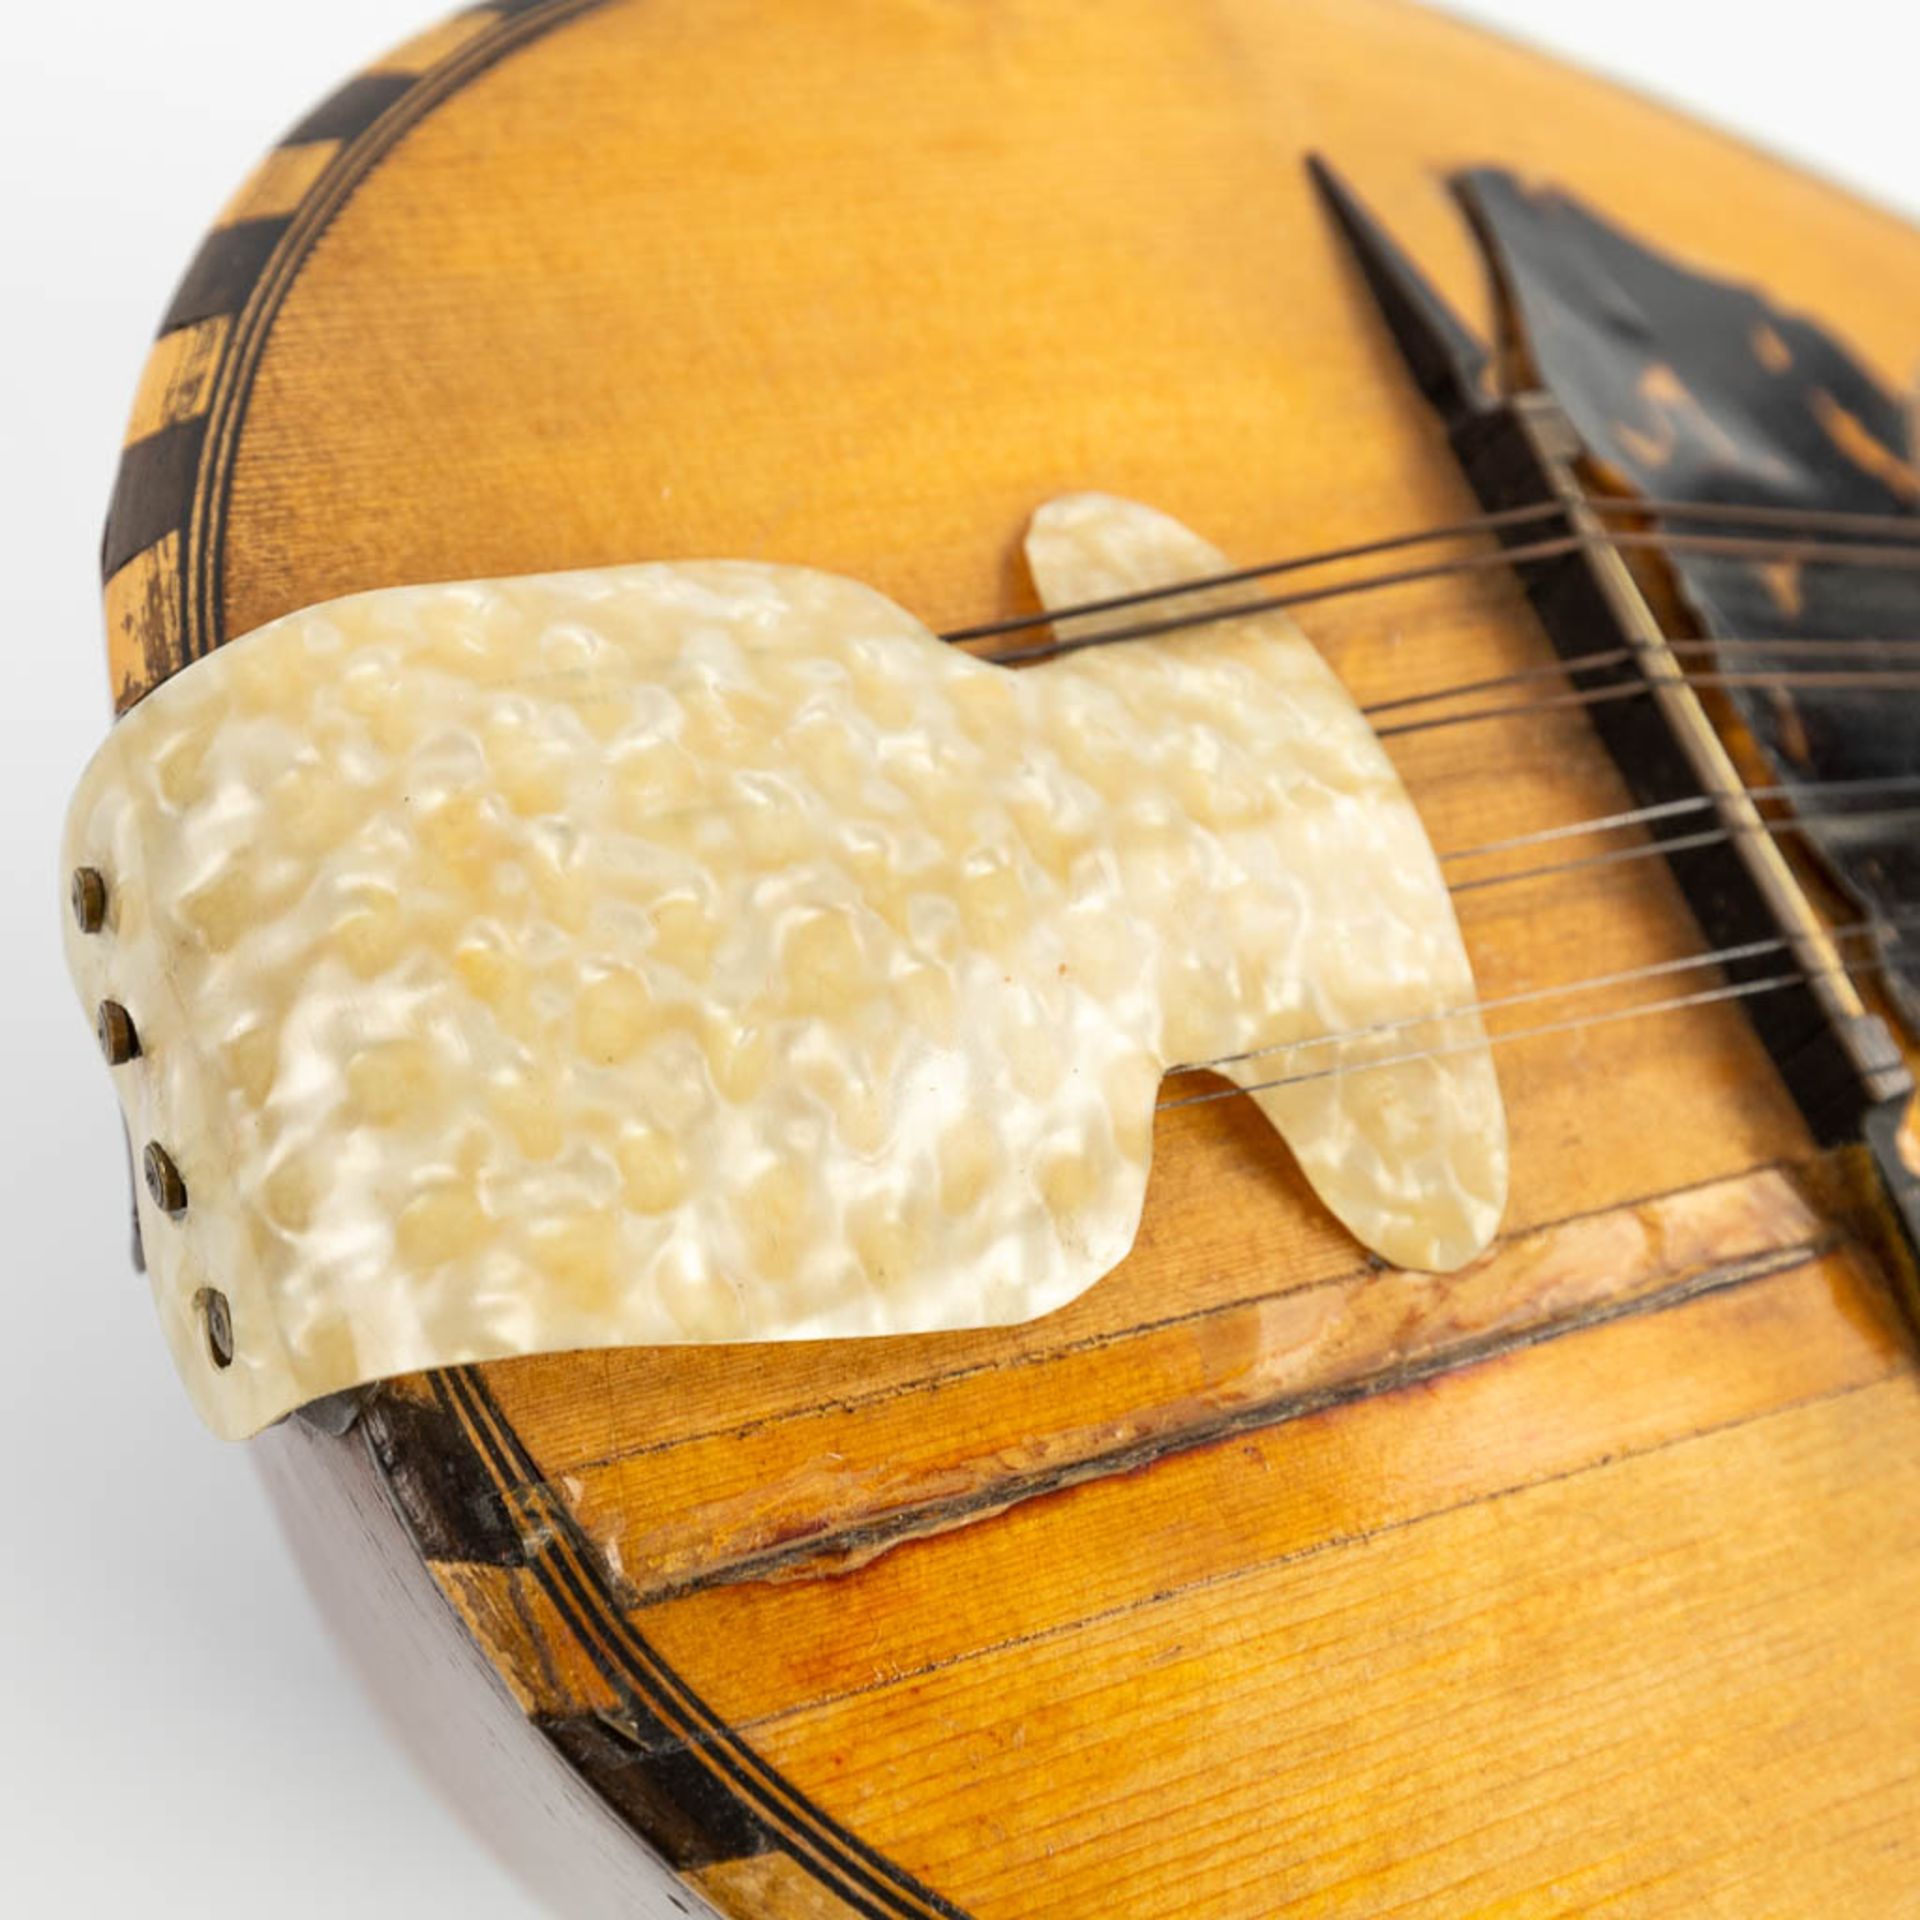 A collection of 3 musical instruments: 2 mandolines and a violin, after a model made by Stradivarius - Image 32 of 56